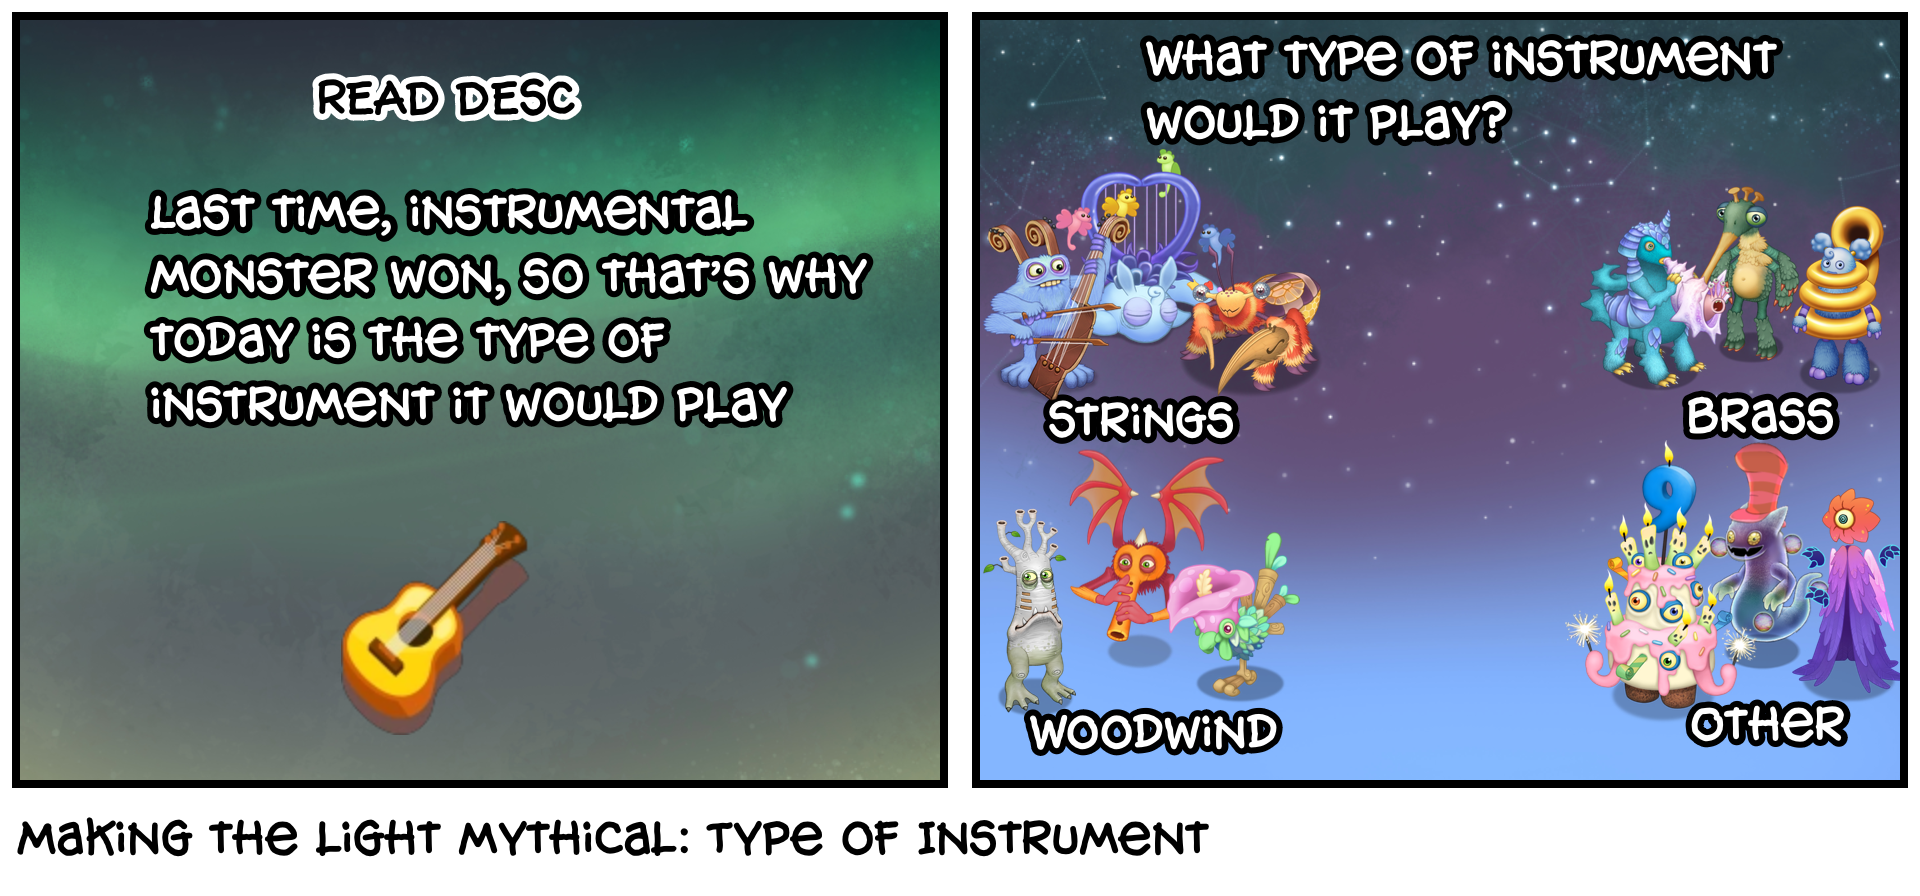 Making the light mythical: Type of Instrument